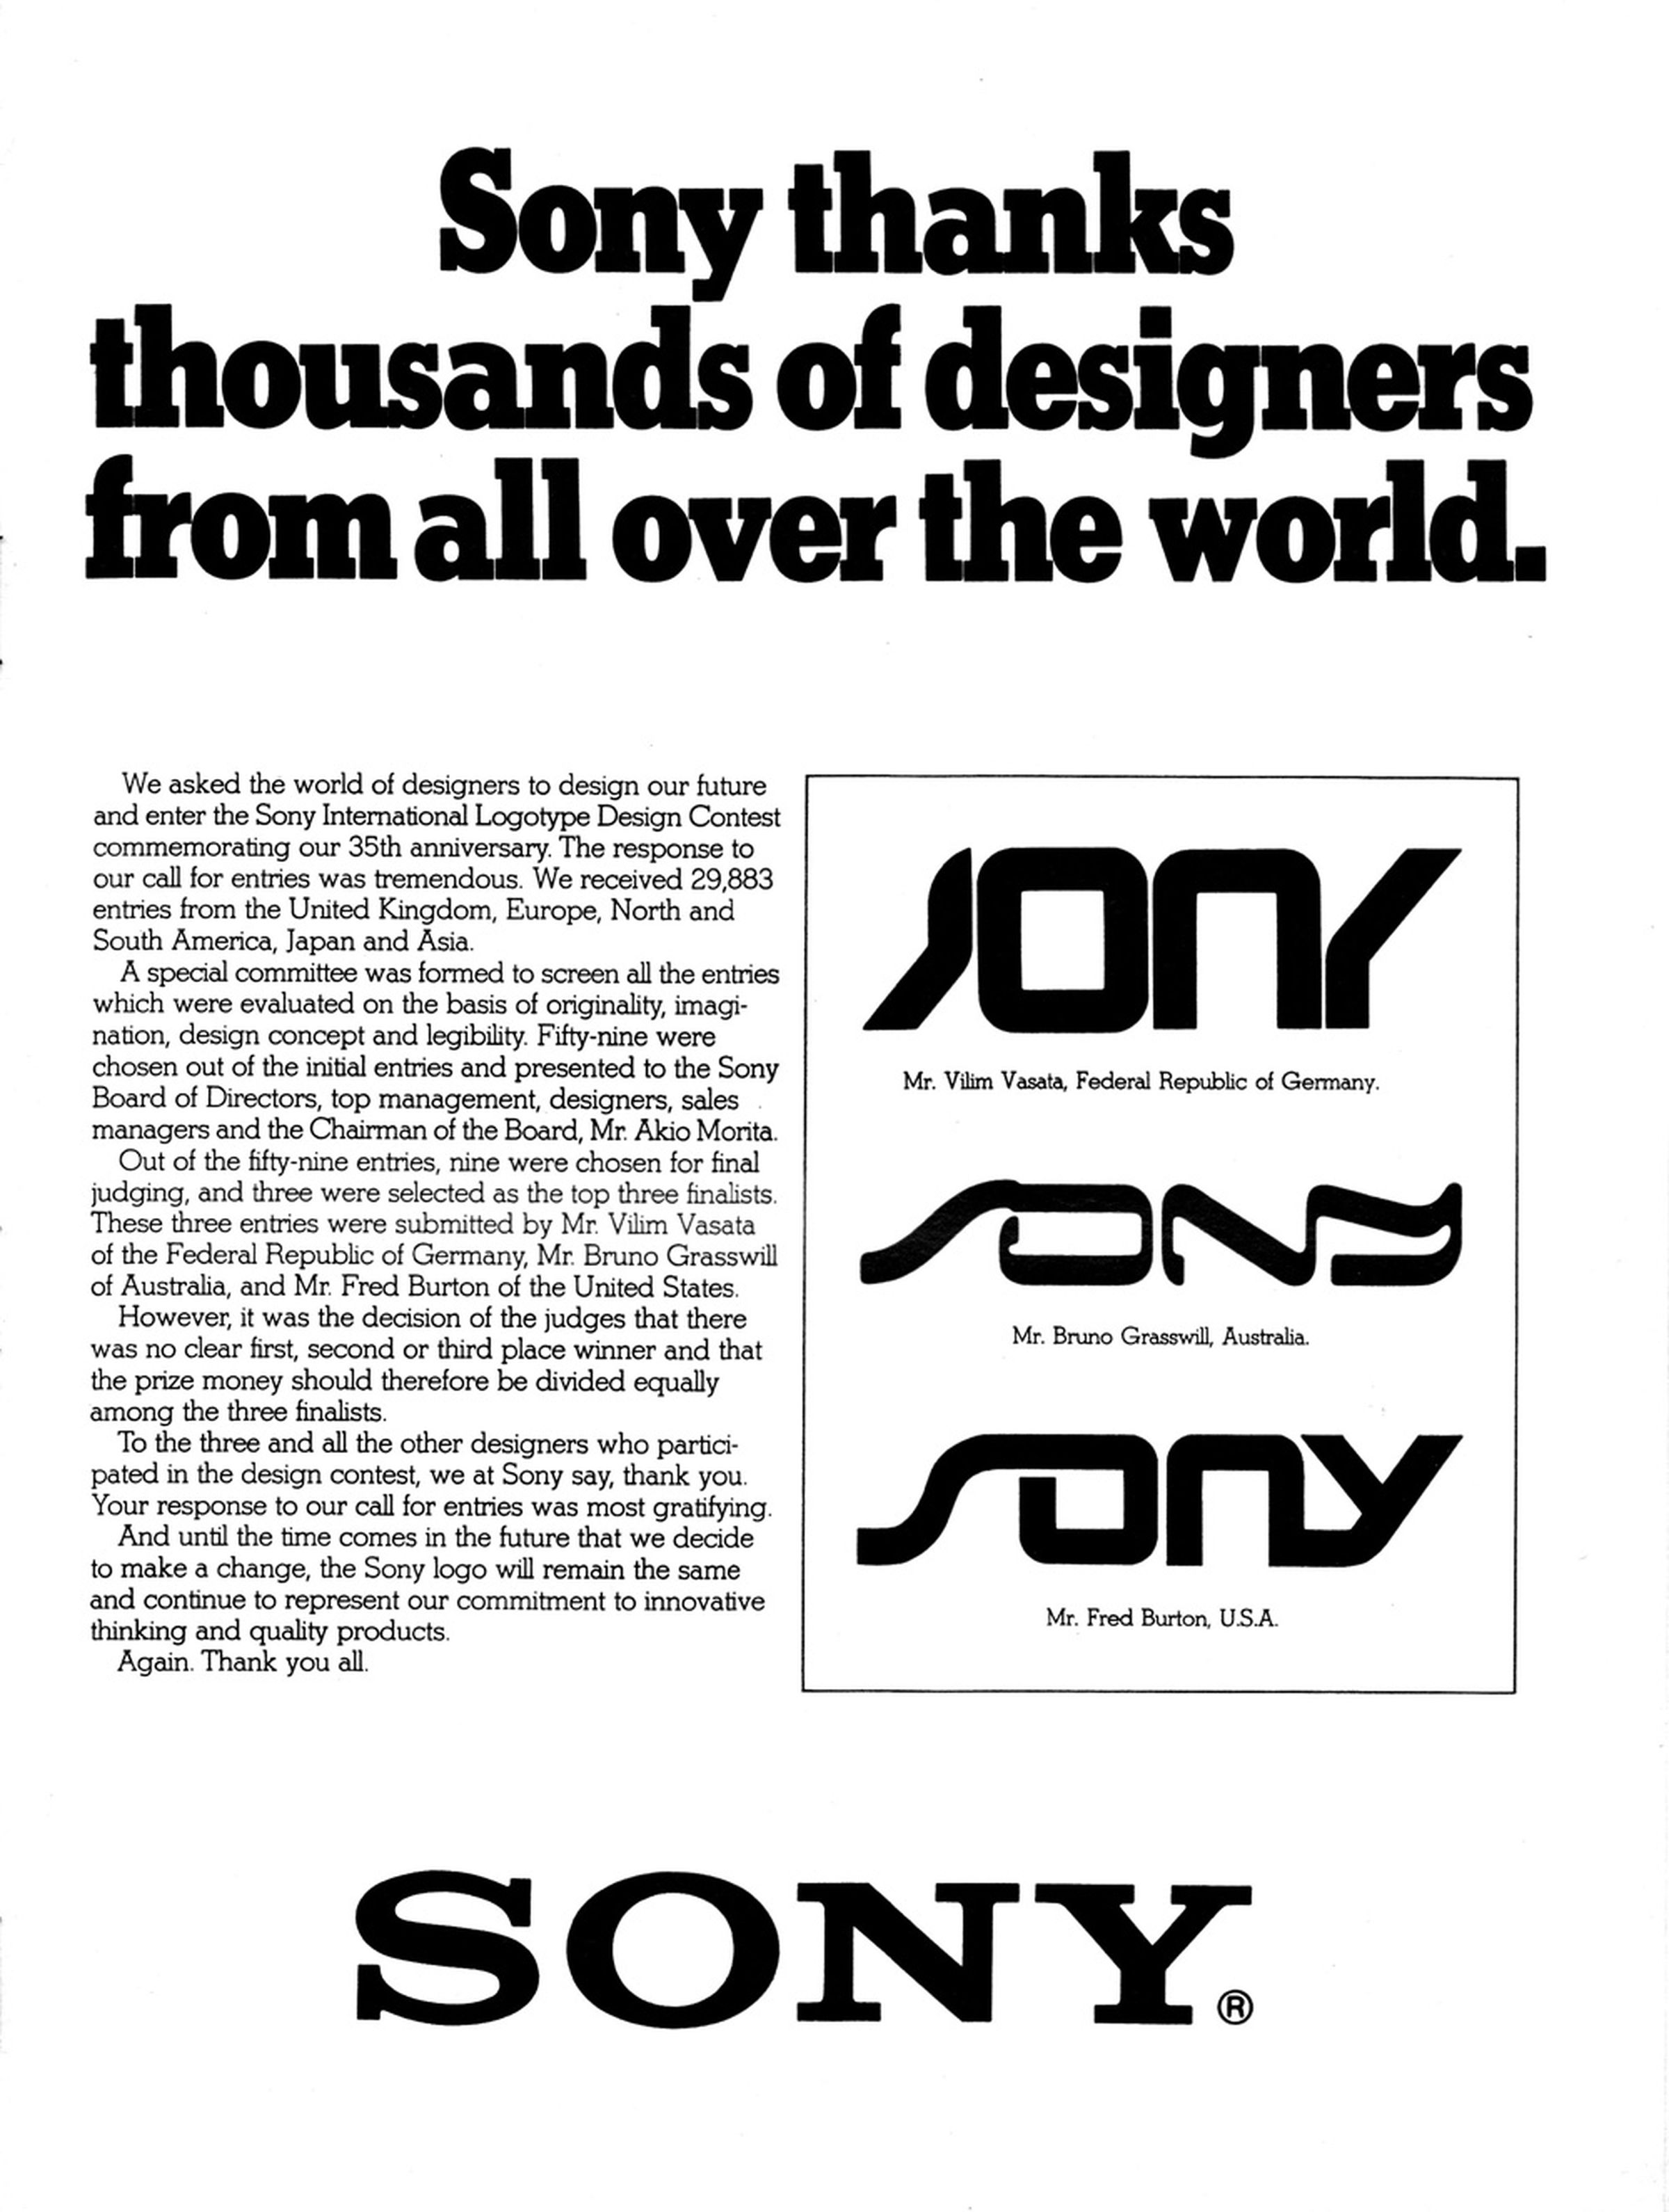 Sony design competition